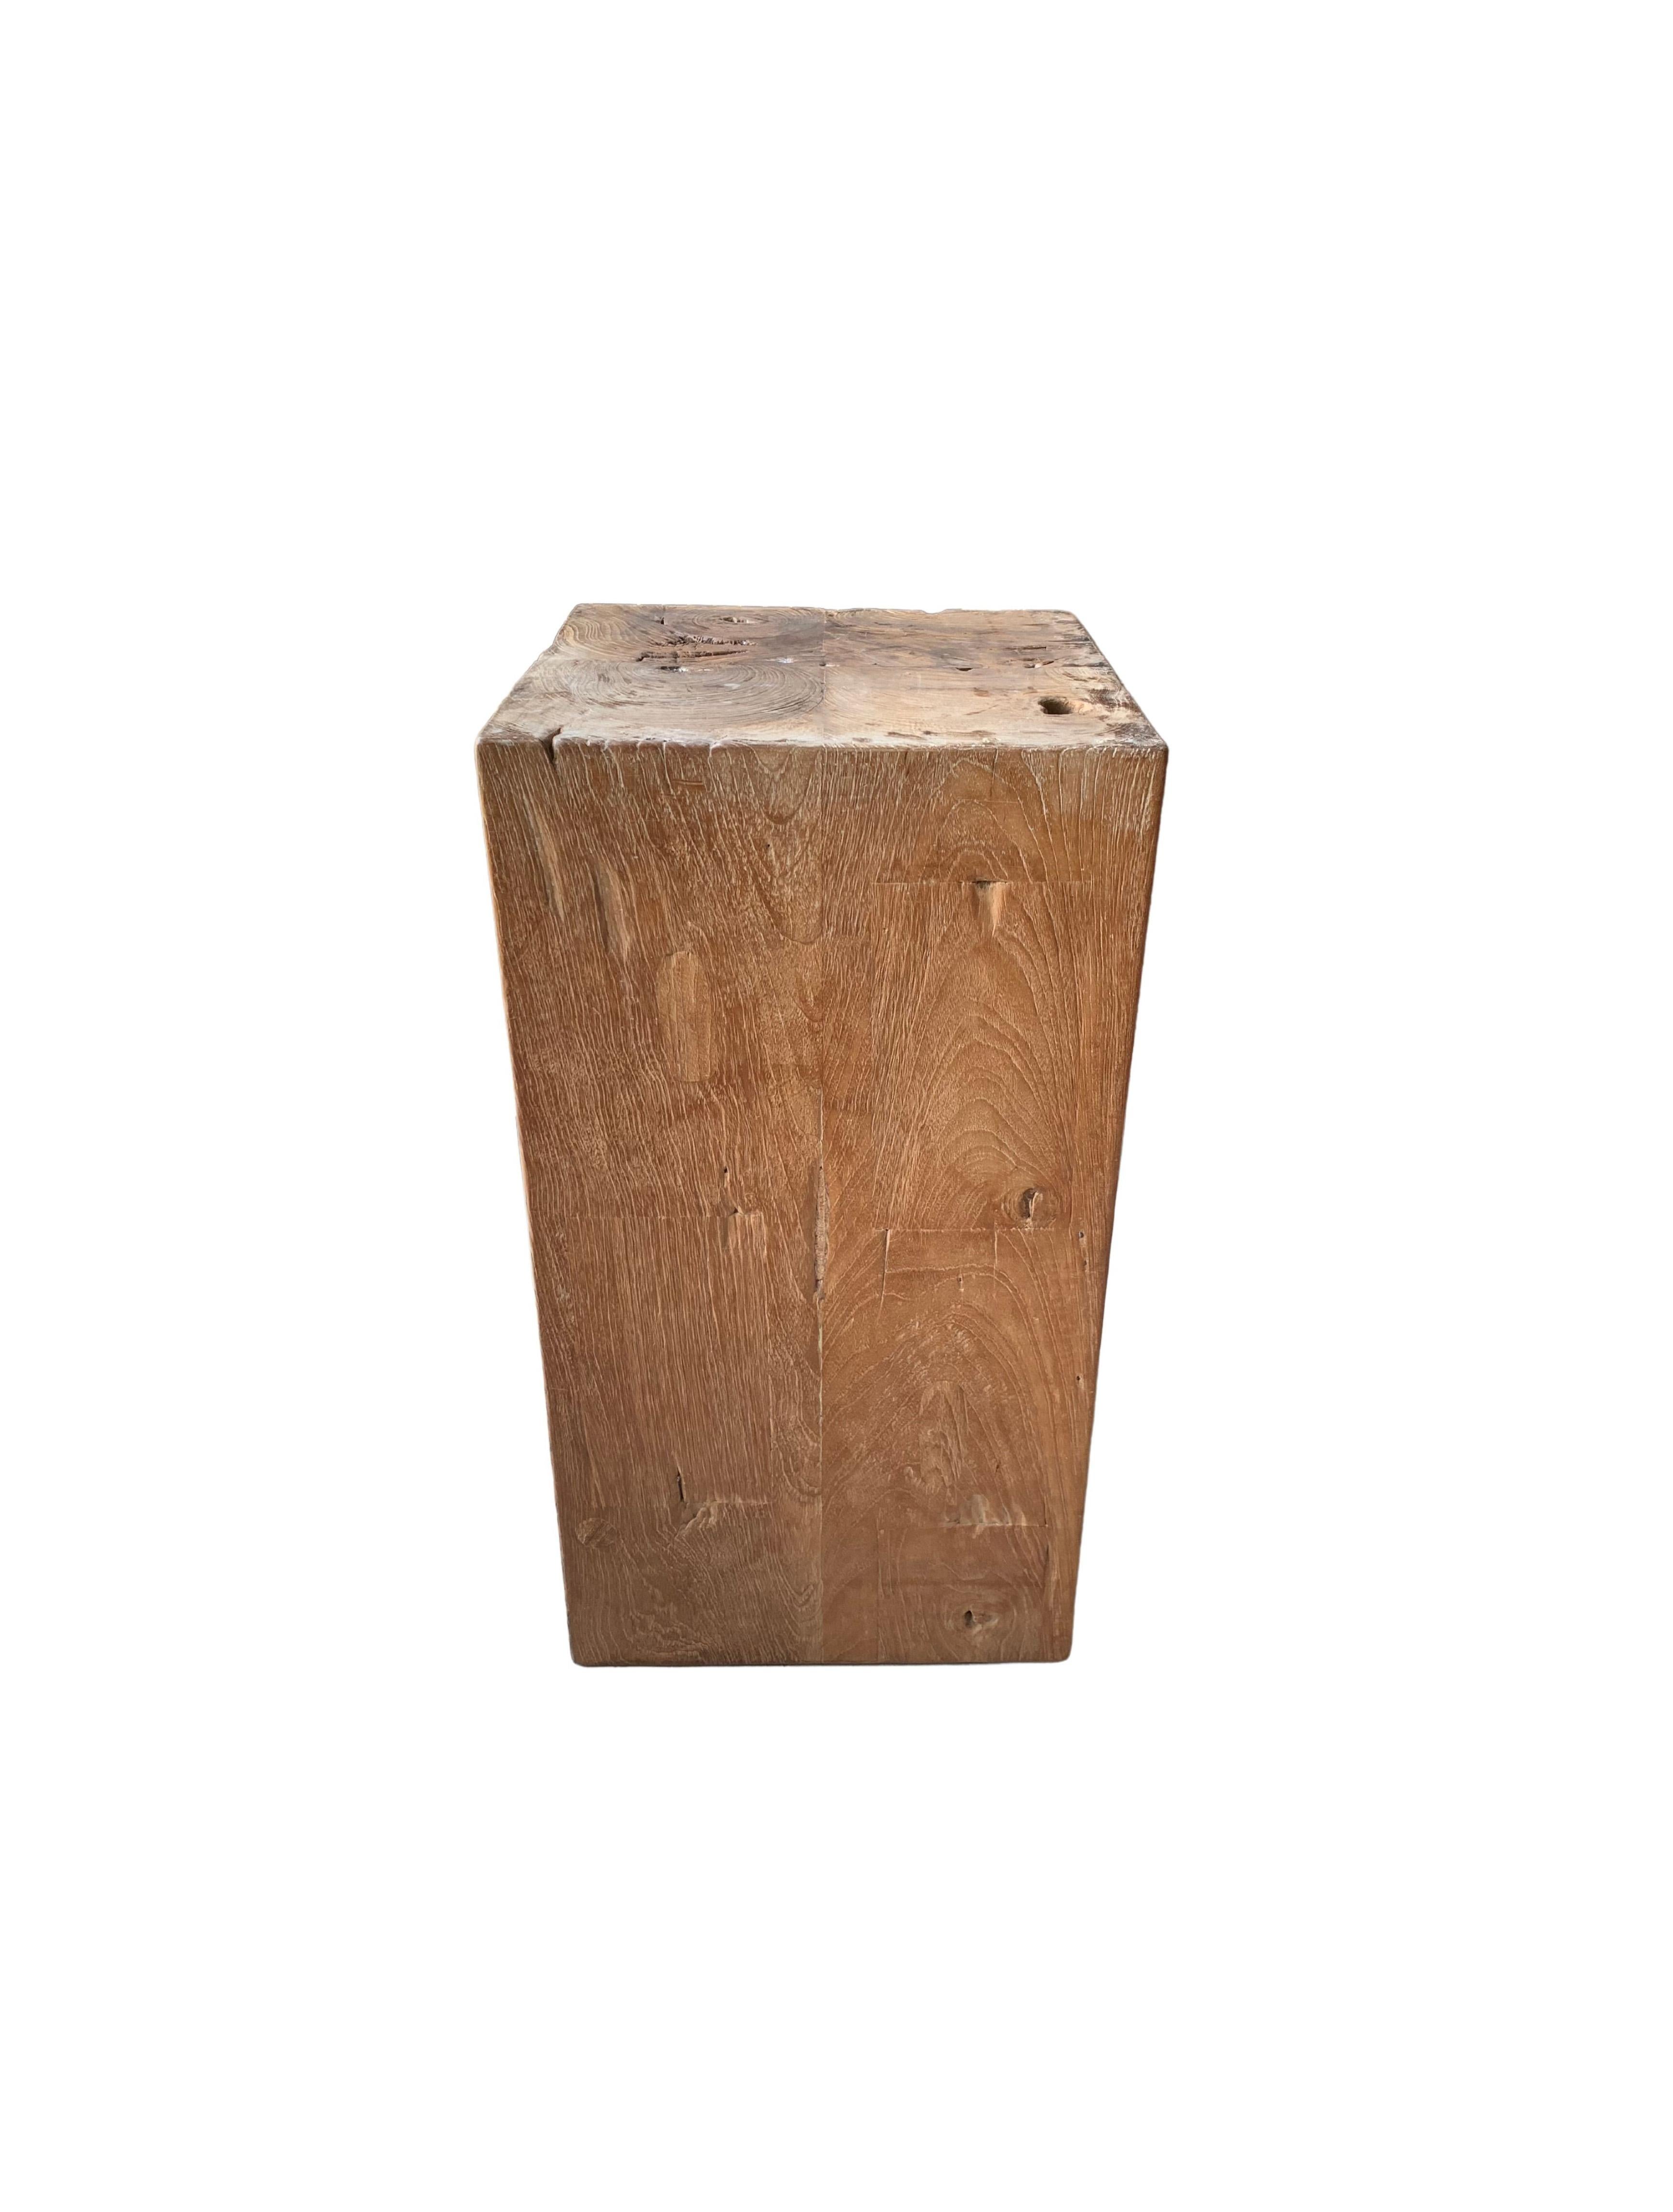 Hand-Crafted Teak Wood Pedestal Crafted in Java, Indonesia For Sale